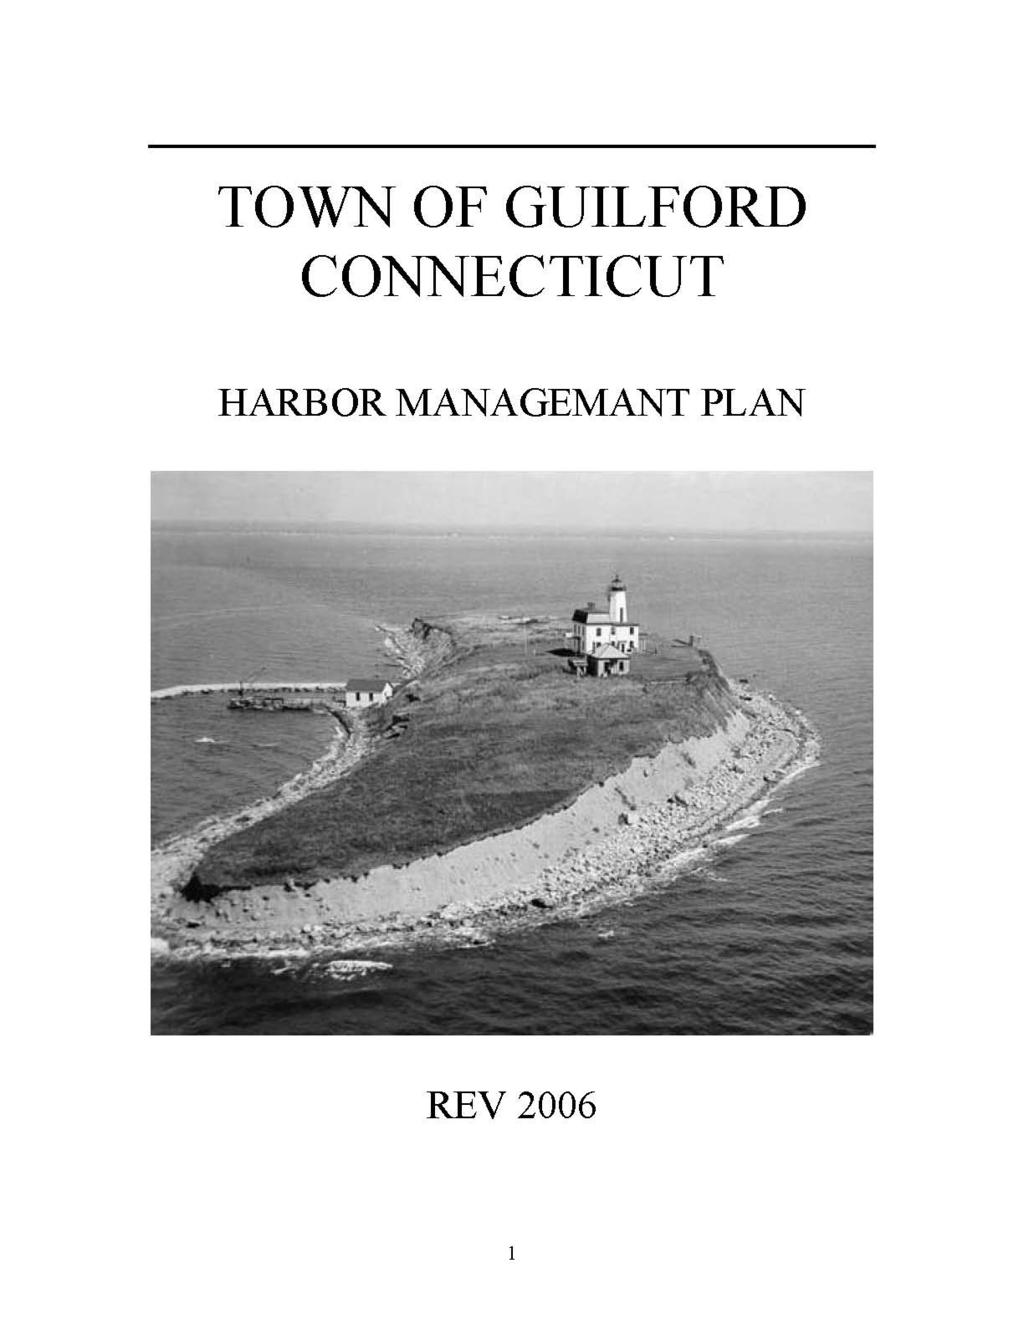 The Harbor Management Plan was developed as enabled by Connecticut General Statutes 22a-113m, and is the Harbor Management Commission's summary of issues and recommendations to the increasing and